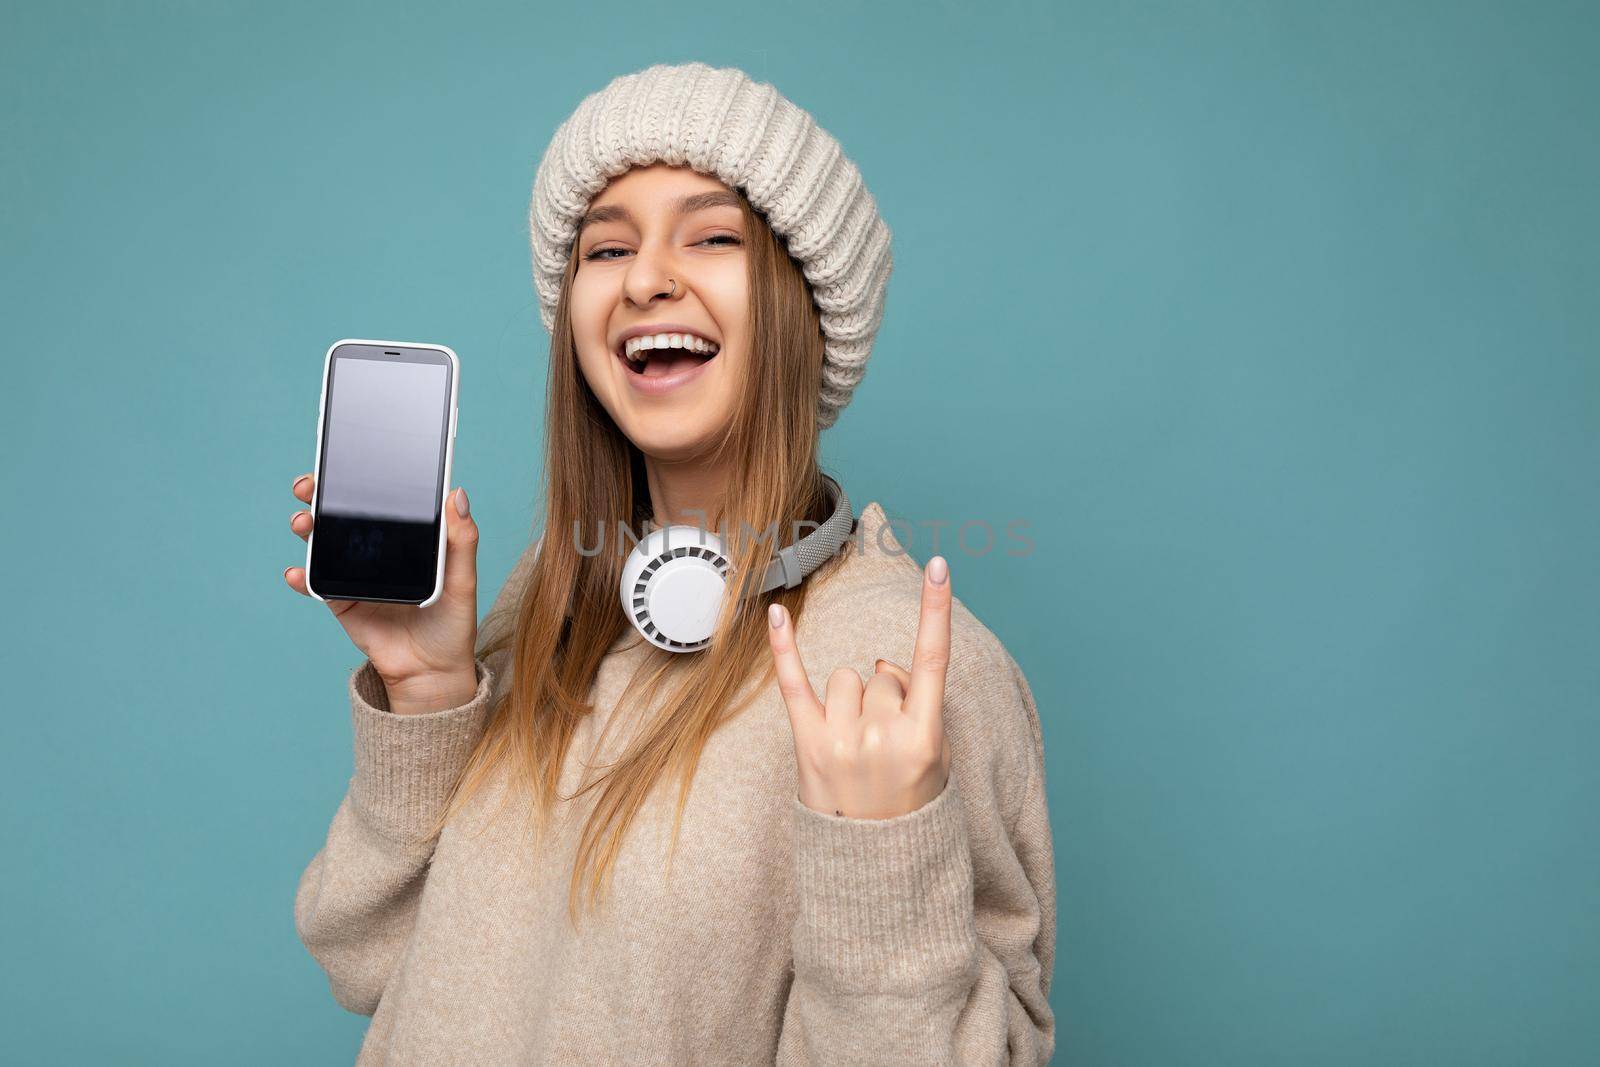 Attractive positive smiling young woman wearing stylish casual outfit isolated on colourful background wall holding and showing mobile phone with empty screen for cutout wearing white bluetooth headphones and having fun looking at camera and showing rock and roll gesture sign.